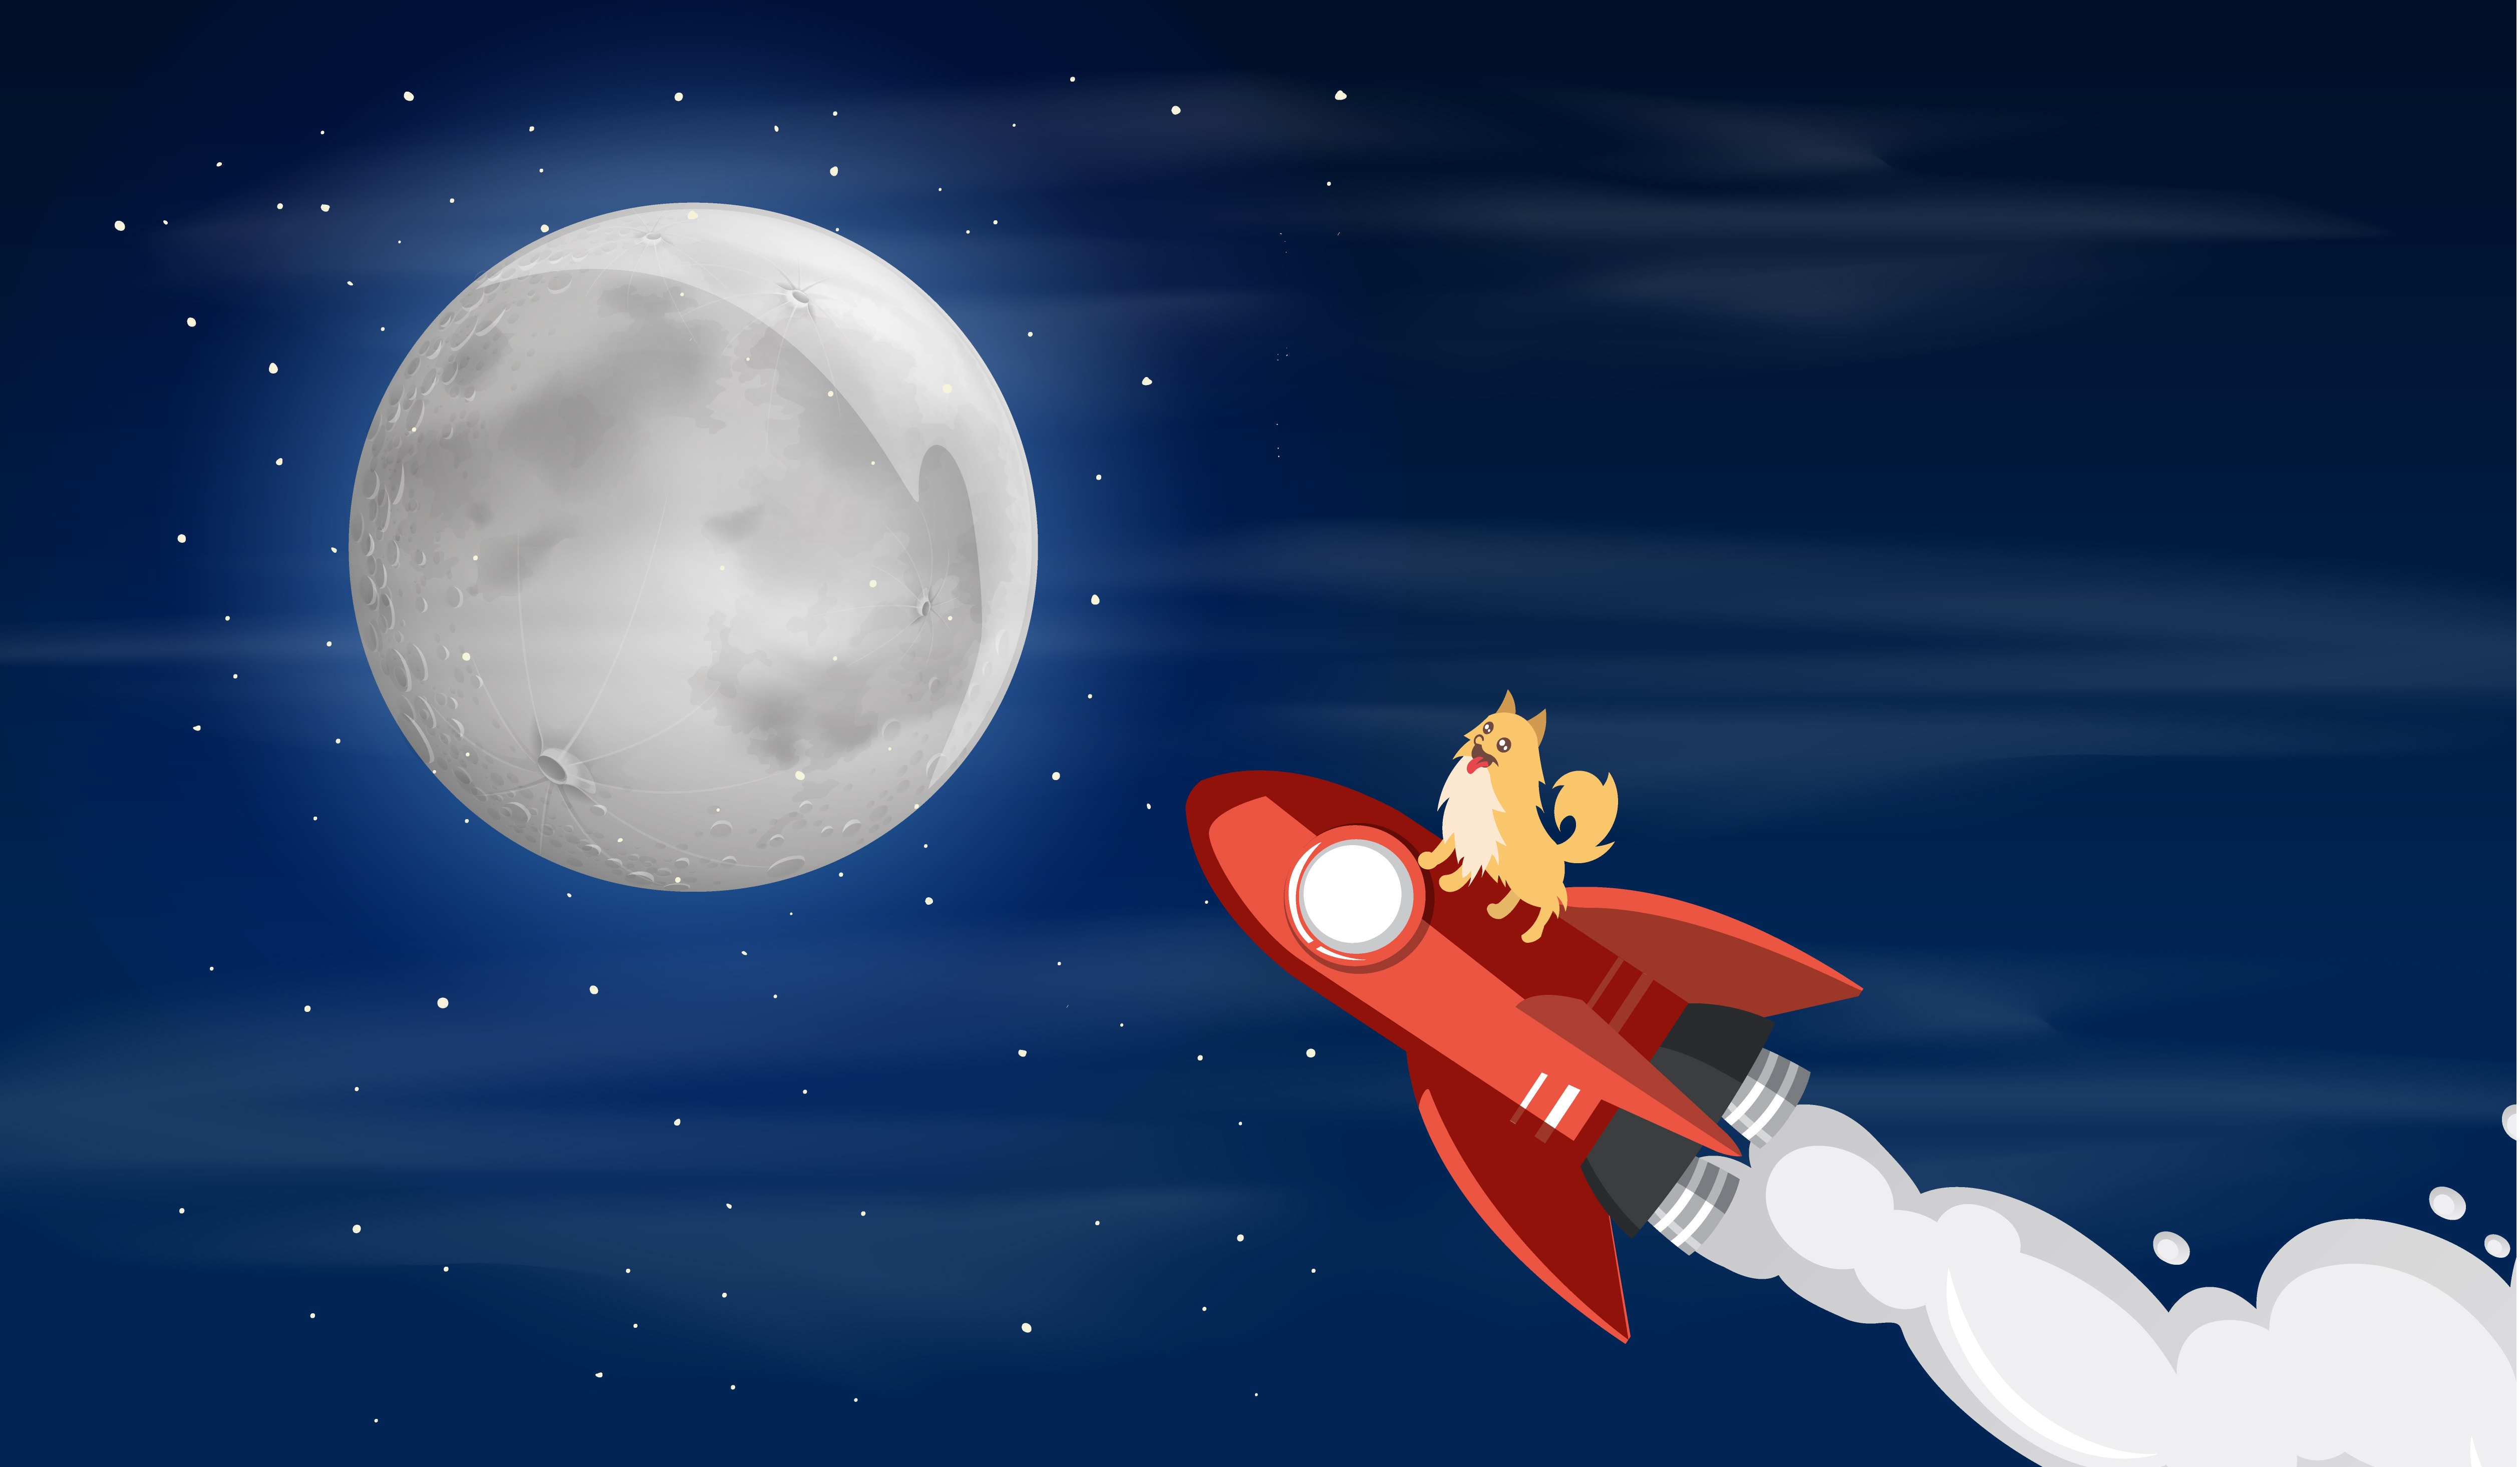 Bitcoin, Ethereum, Dogecoin Surge Higher Into The Weekend: What's Happening?